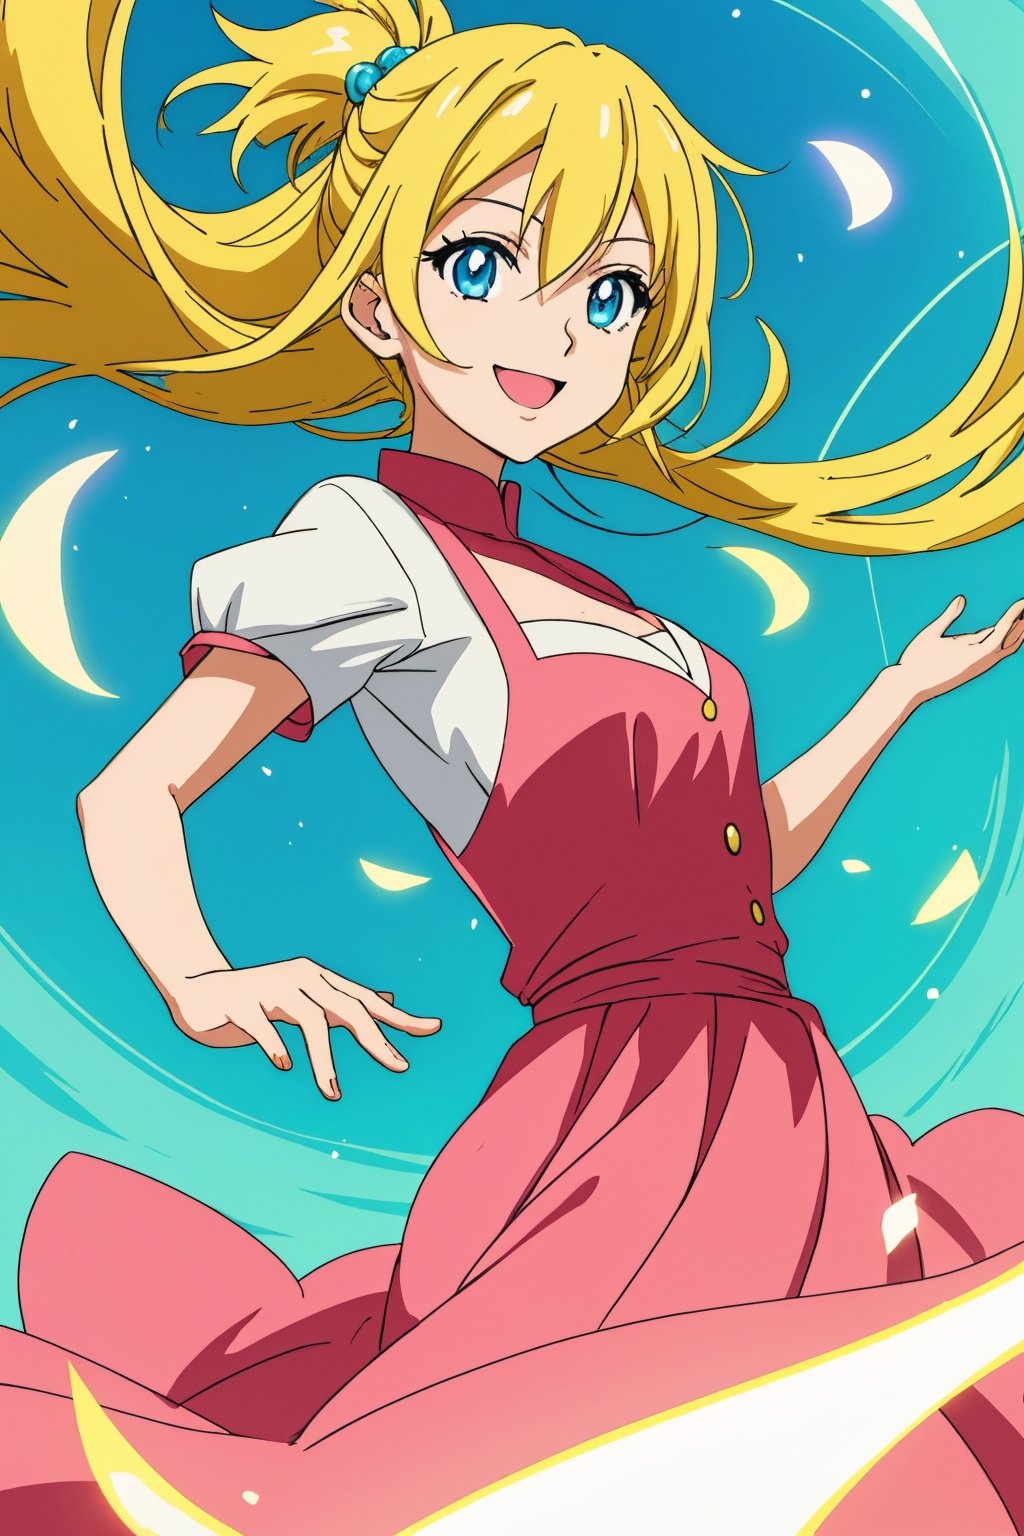 (best quality, vivid colors, anime:1.1), detailed eyes and face, flowing dress, vibrant background, gentle sunlight, cheerful expression, dynamic pose, artistic lighting